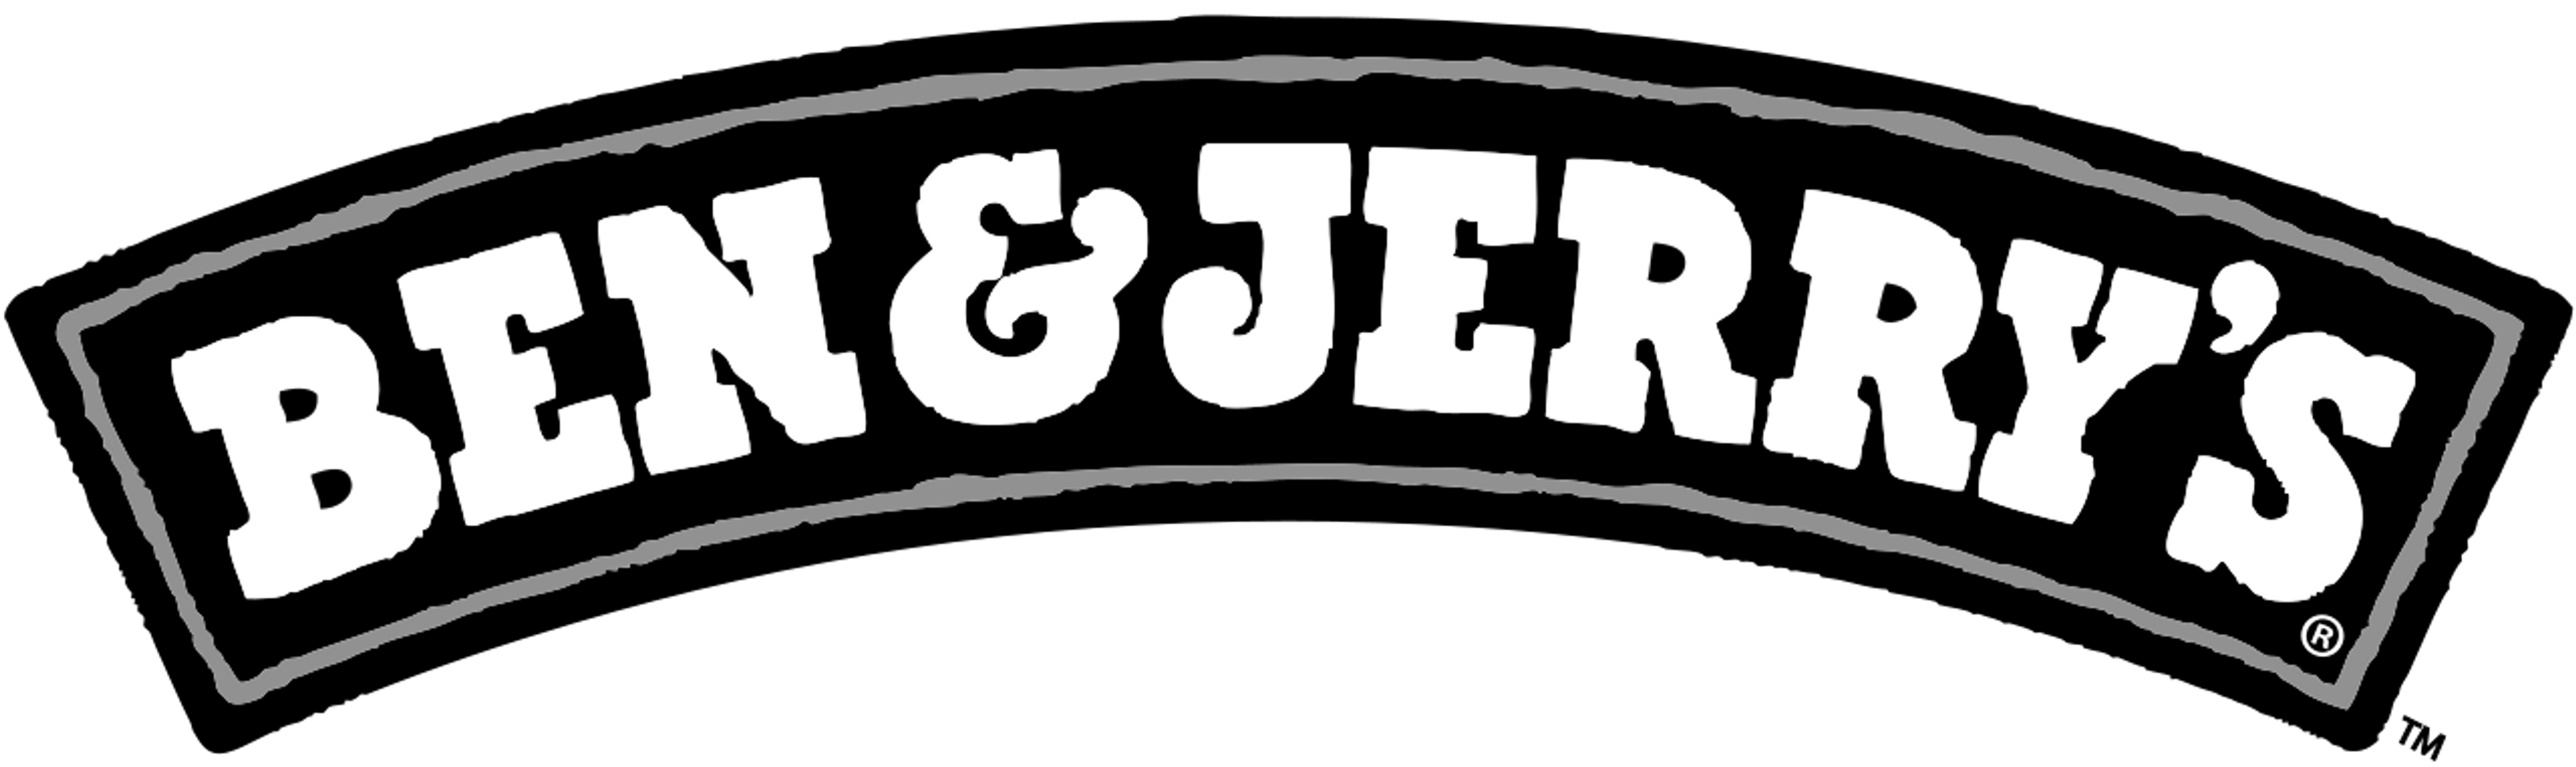 1280px-Ben_and_jerry_logo_sw